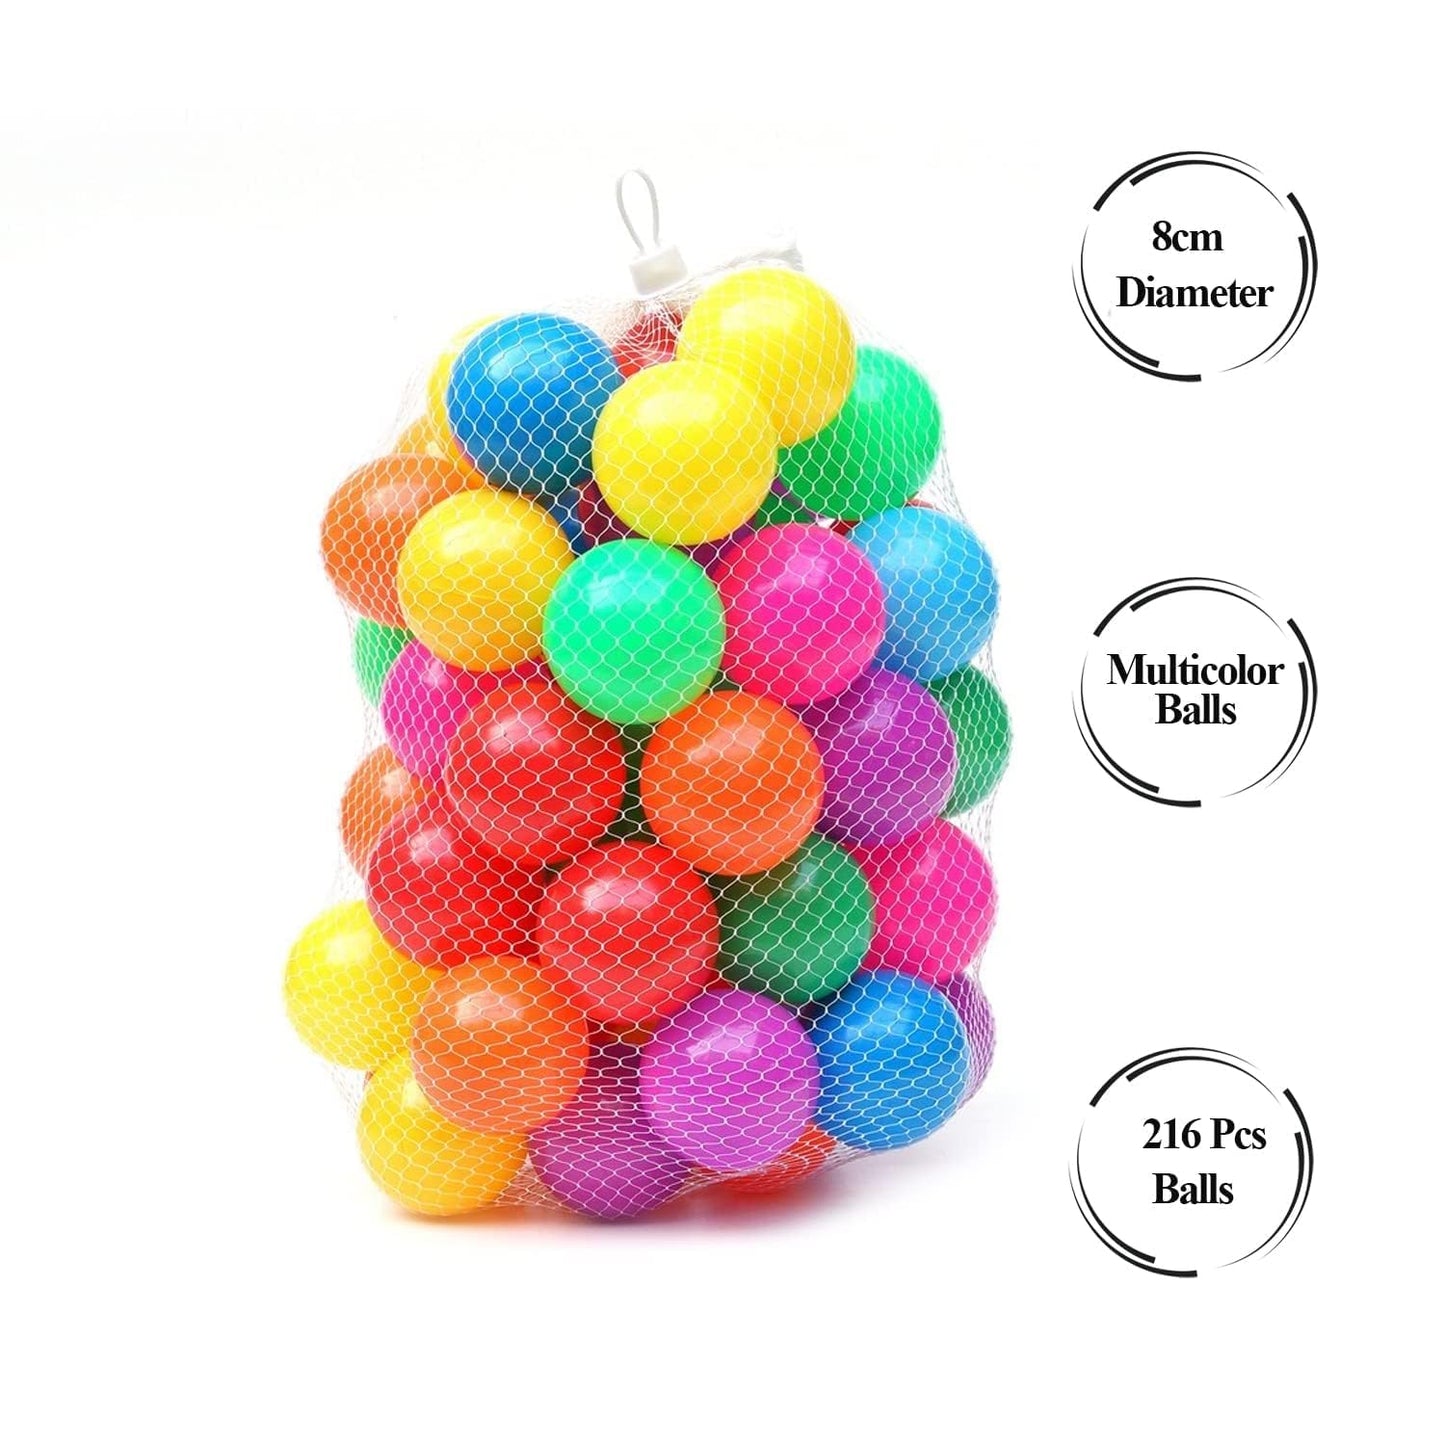 BAYBEE Soft Plastic Baby Pit Balls for Kids Reusable Soft Crush Proof Play Pit Balls Multicolour - (216 Pcs)